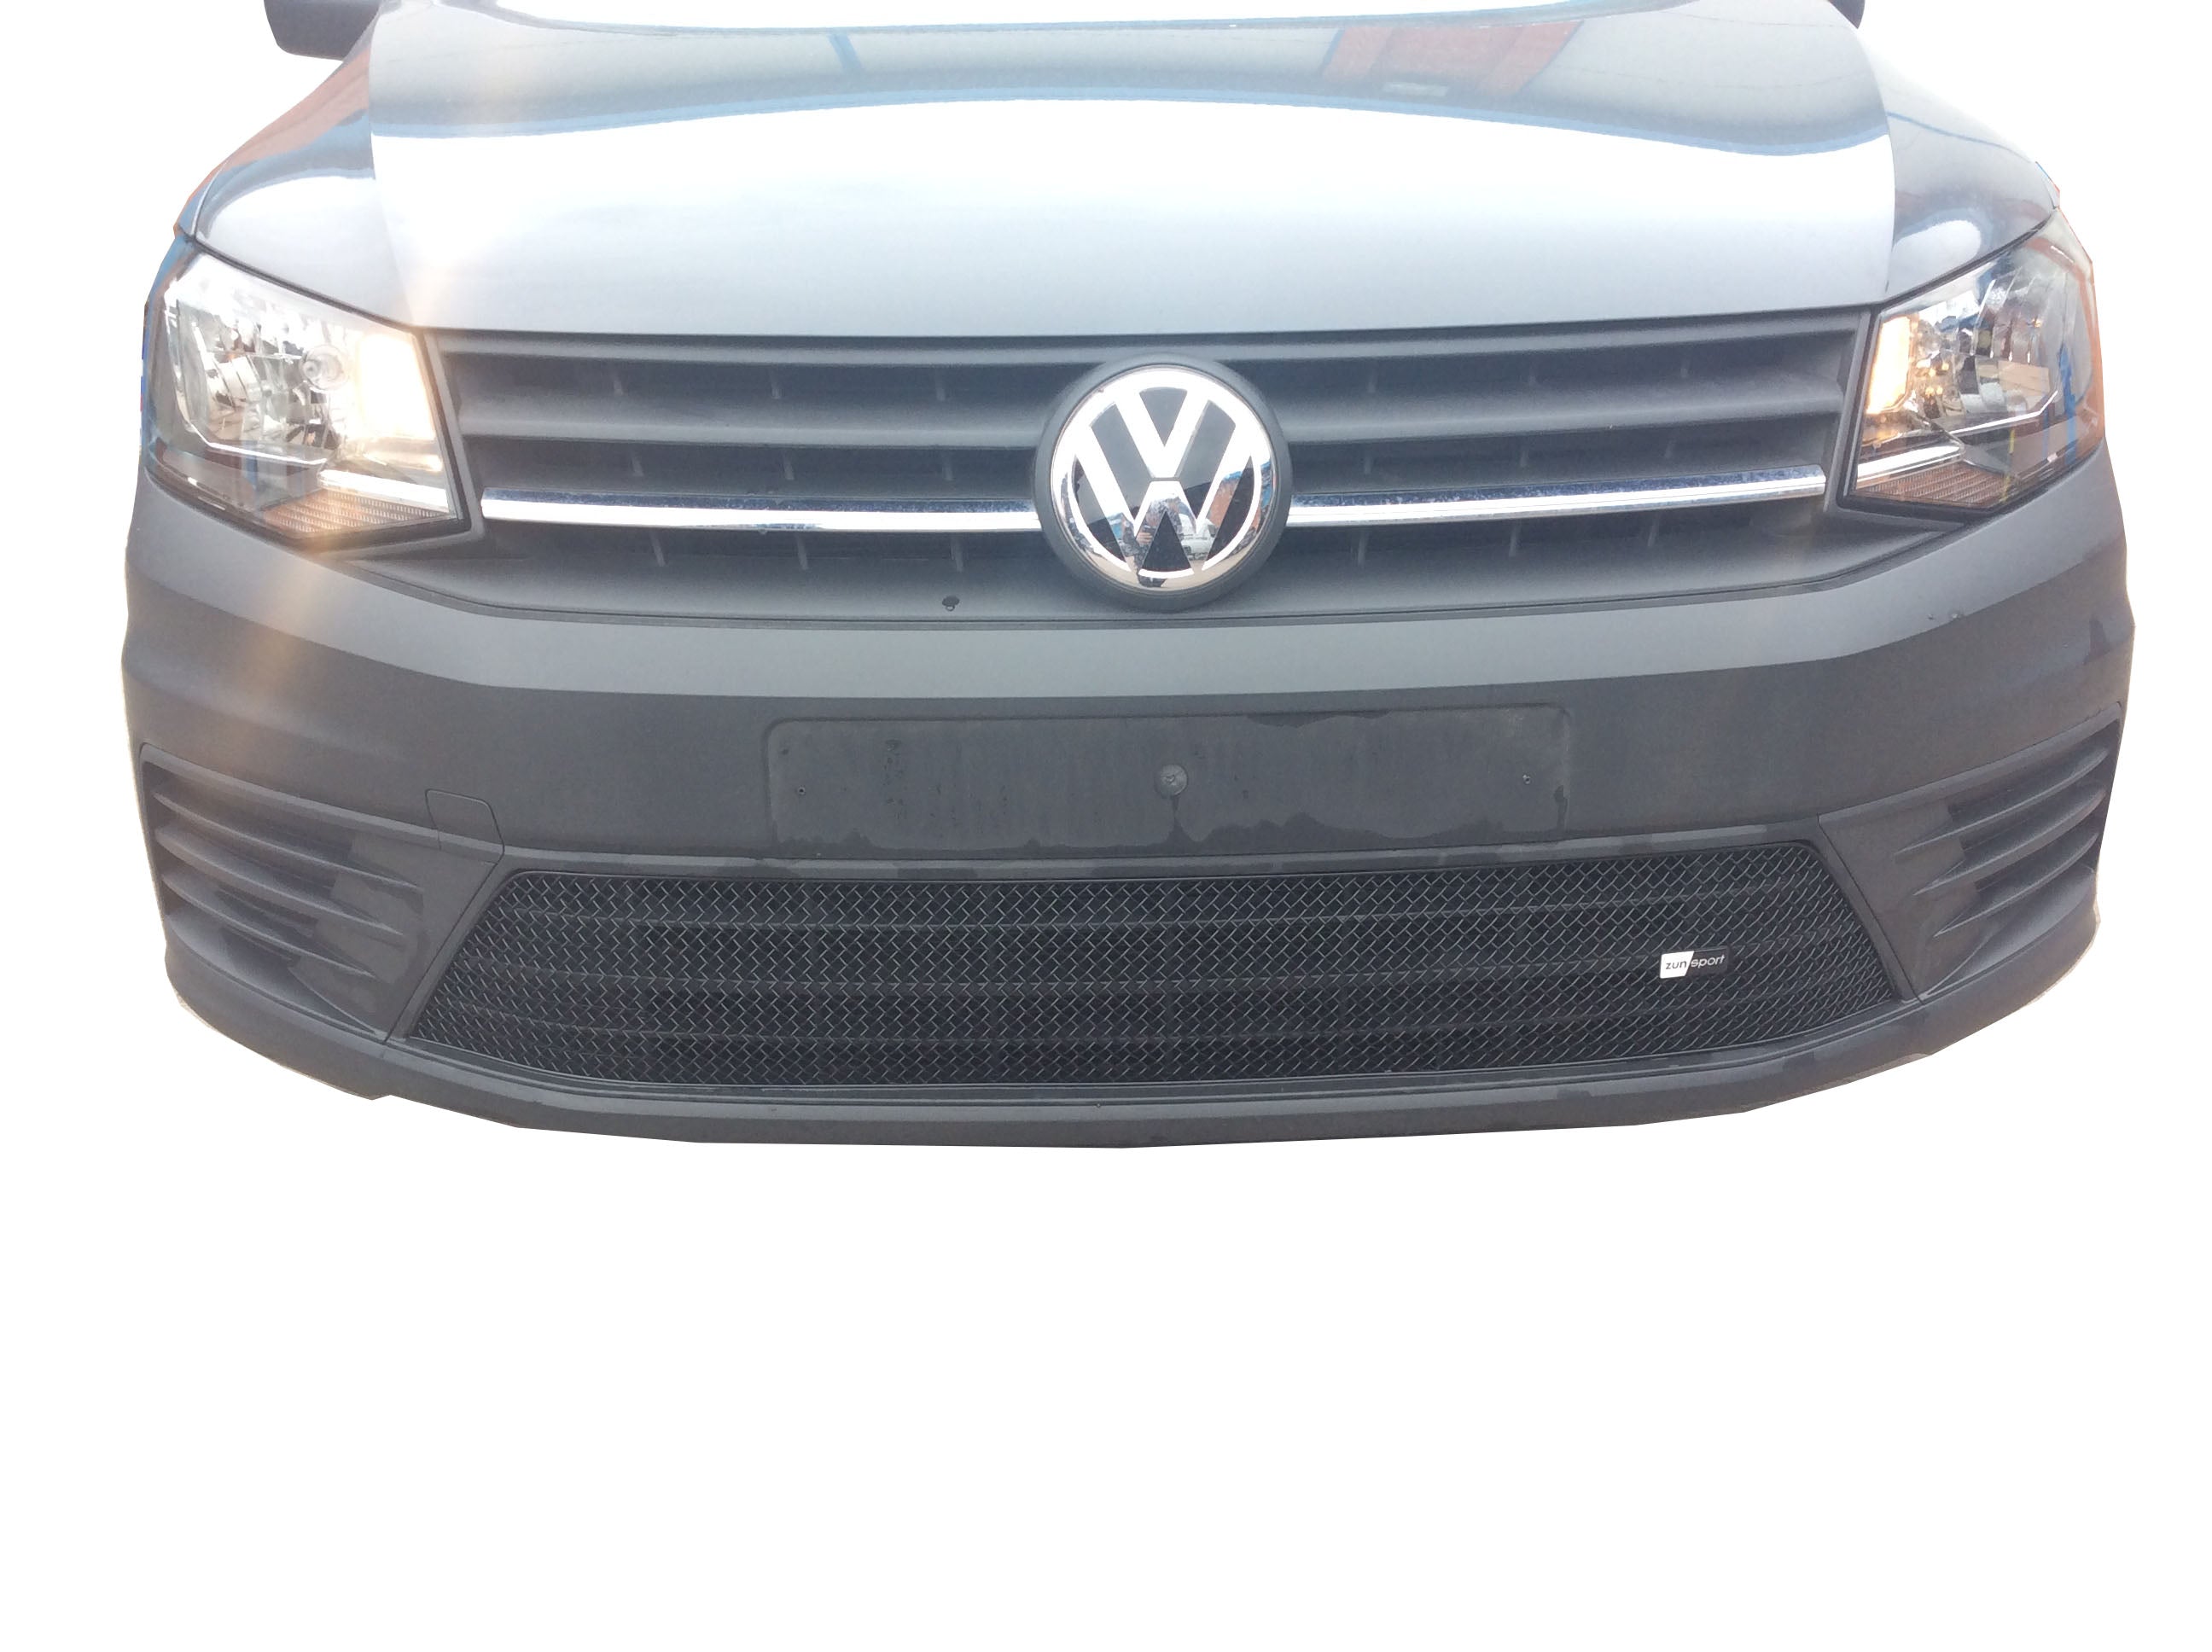 Zunsport VW Caddy 2nd Facelift 2015 - Lower Grille